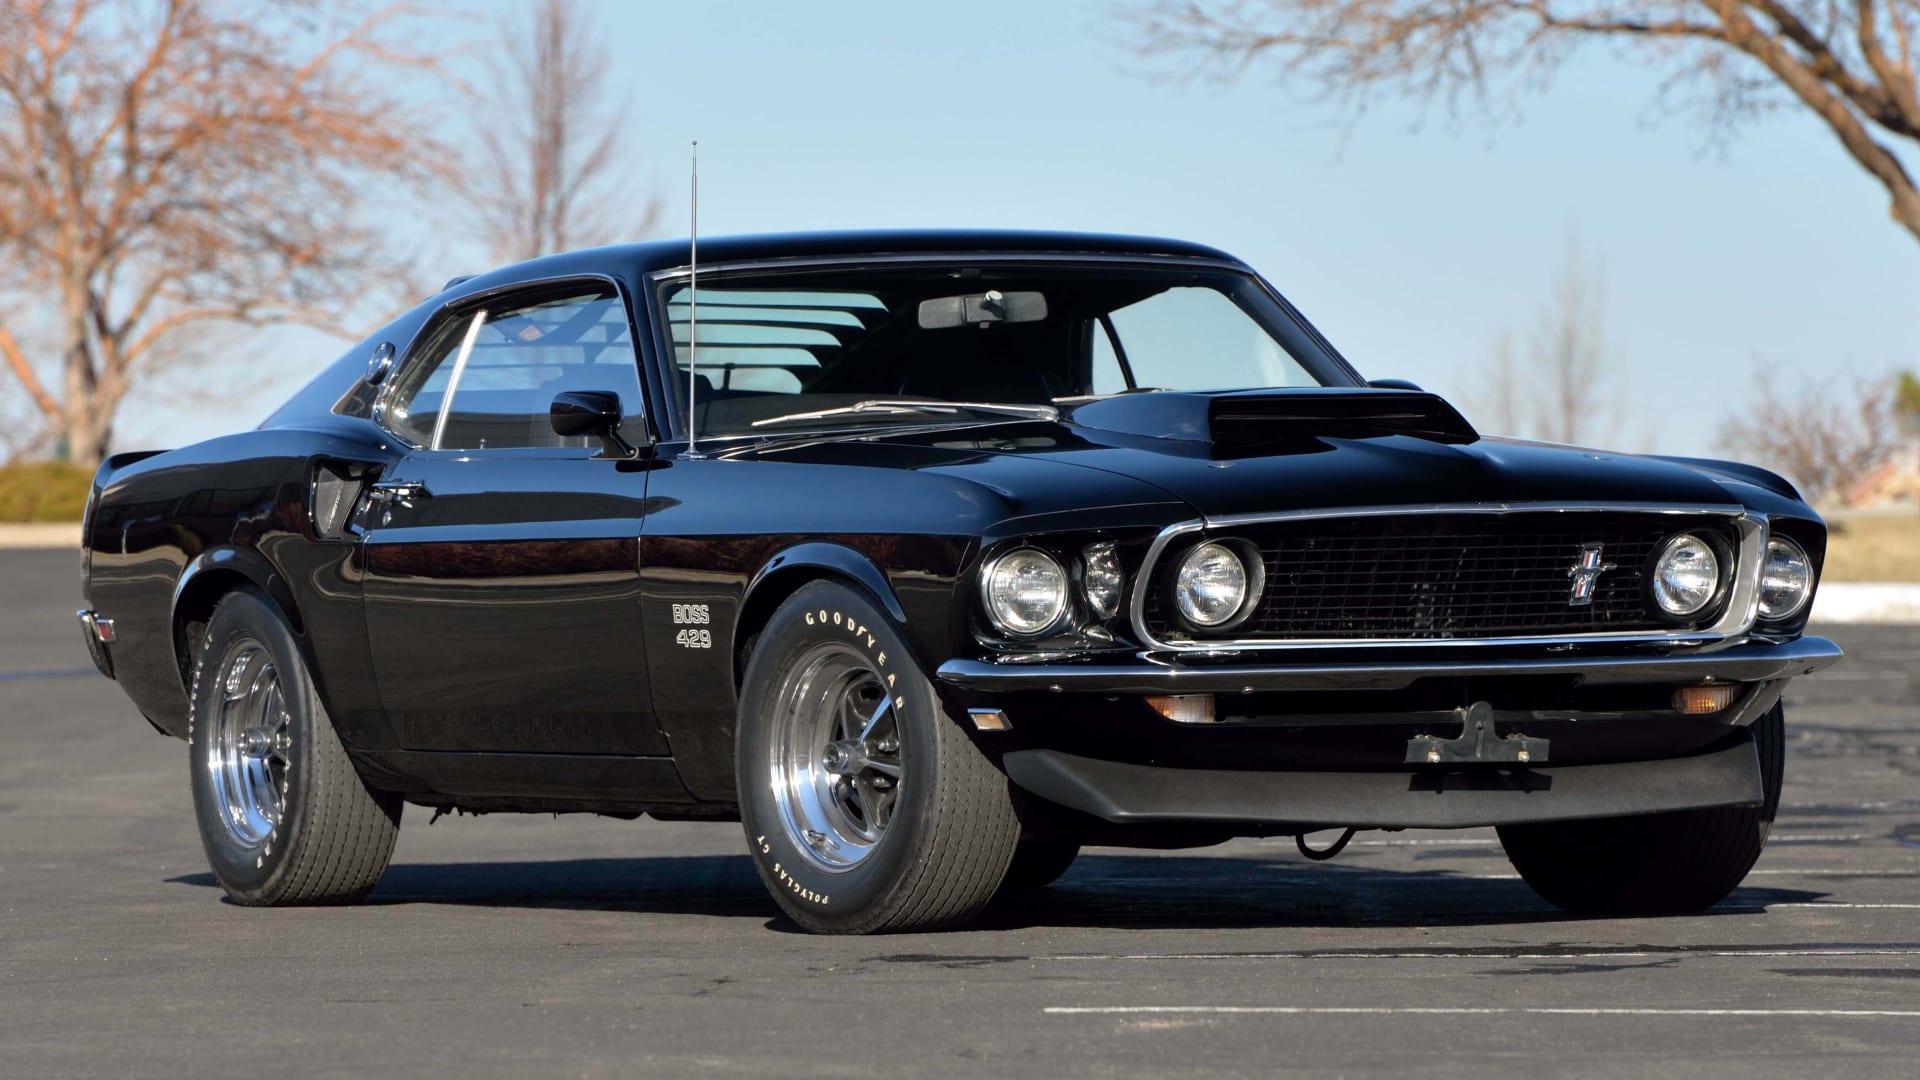 1969 Ford Mustang Boss 429 Fastback at Indy 2022 as S144 - Mecum Auctions